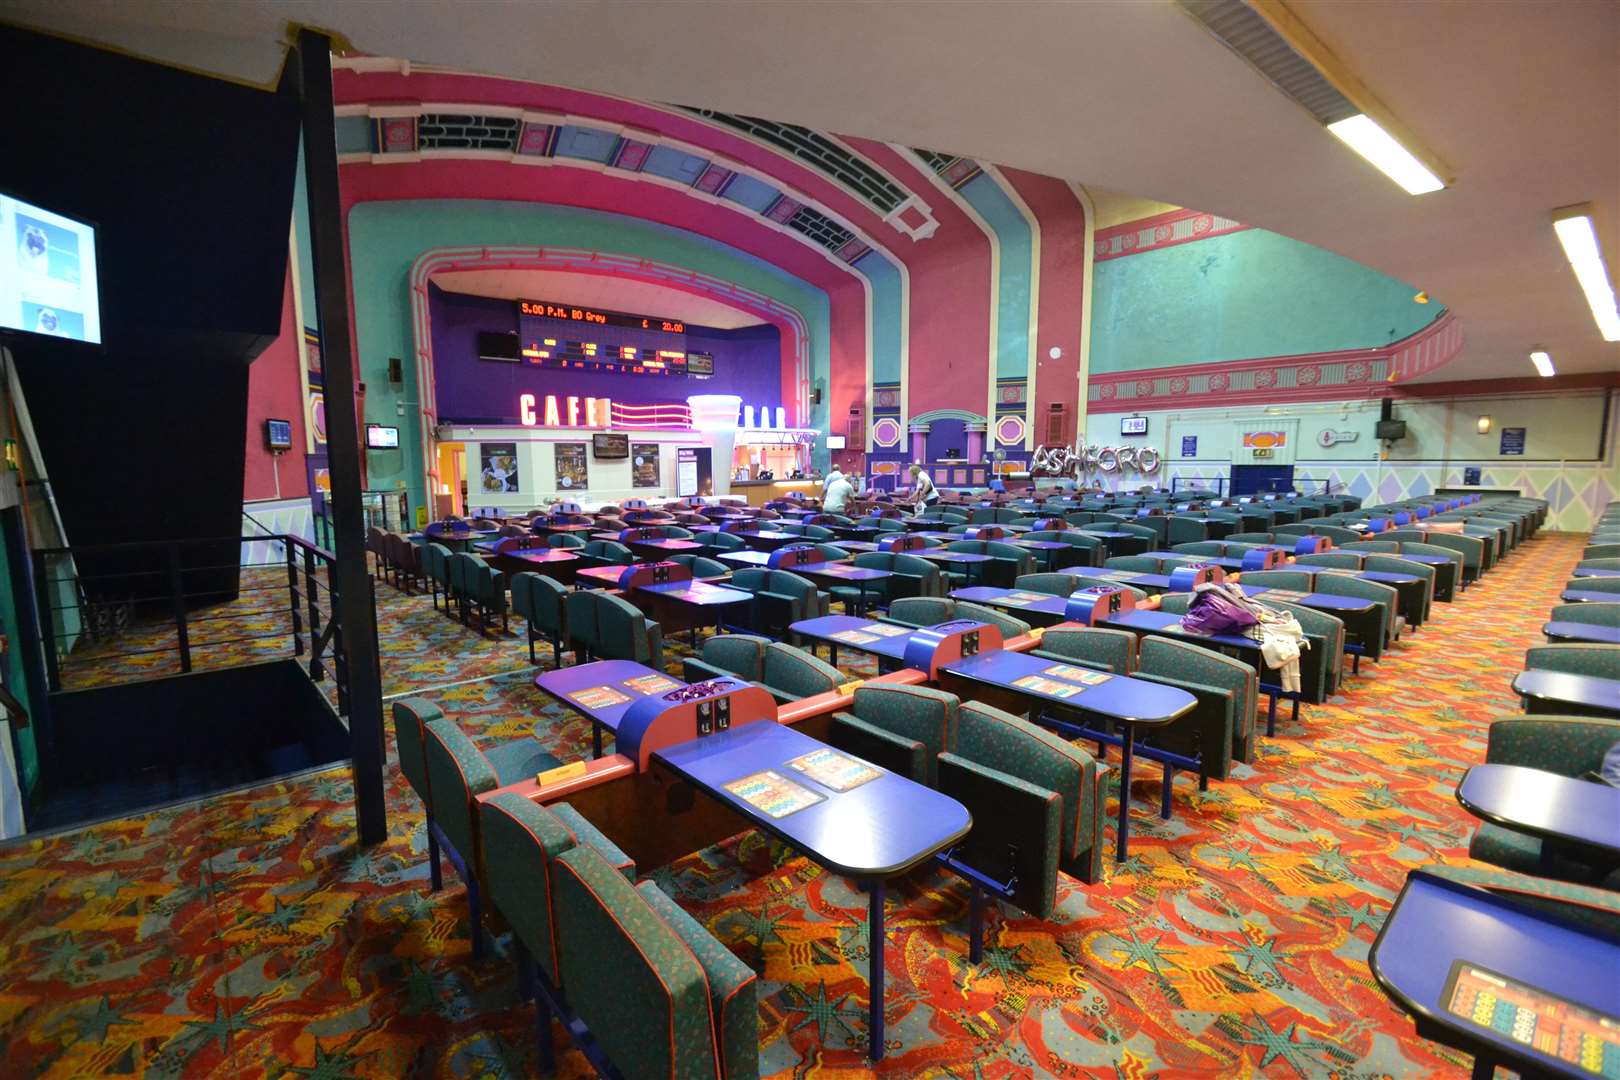 Mecca Bingo moved in during the 1990s. Picture: Steve Salter